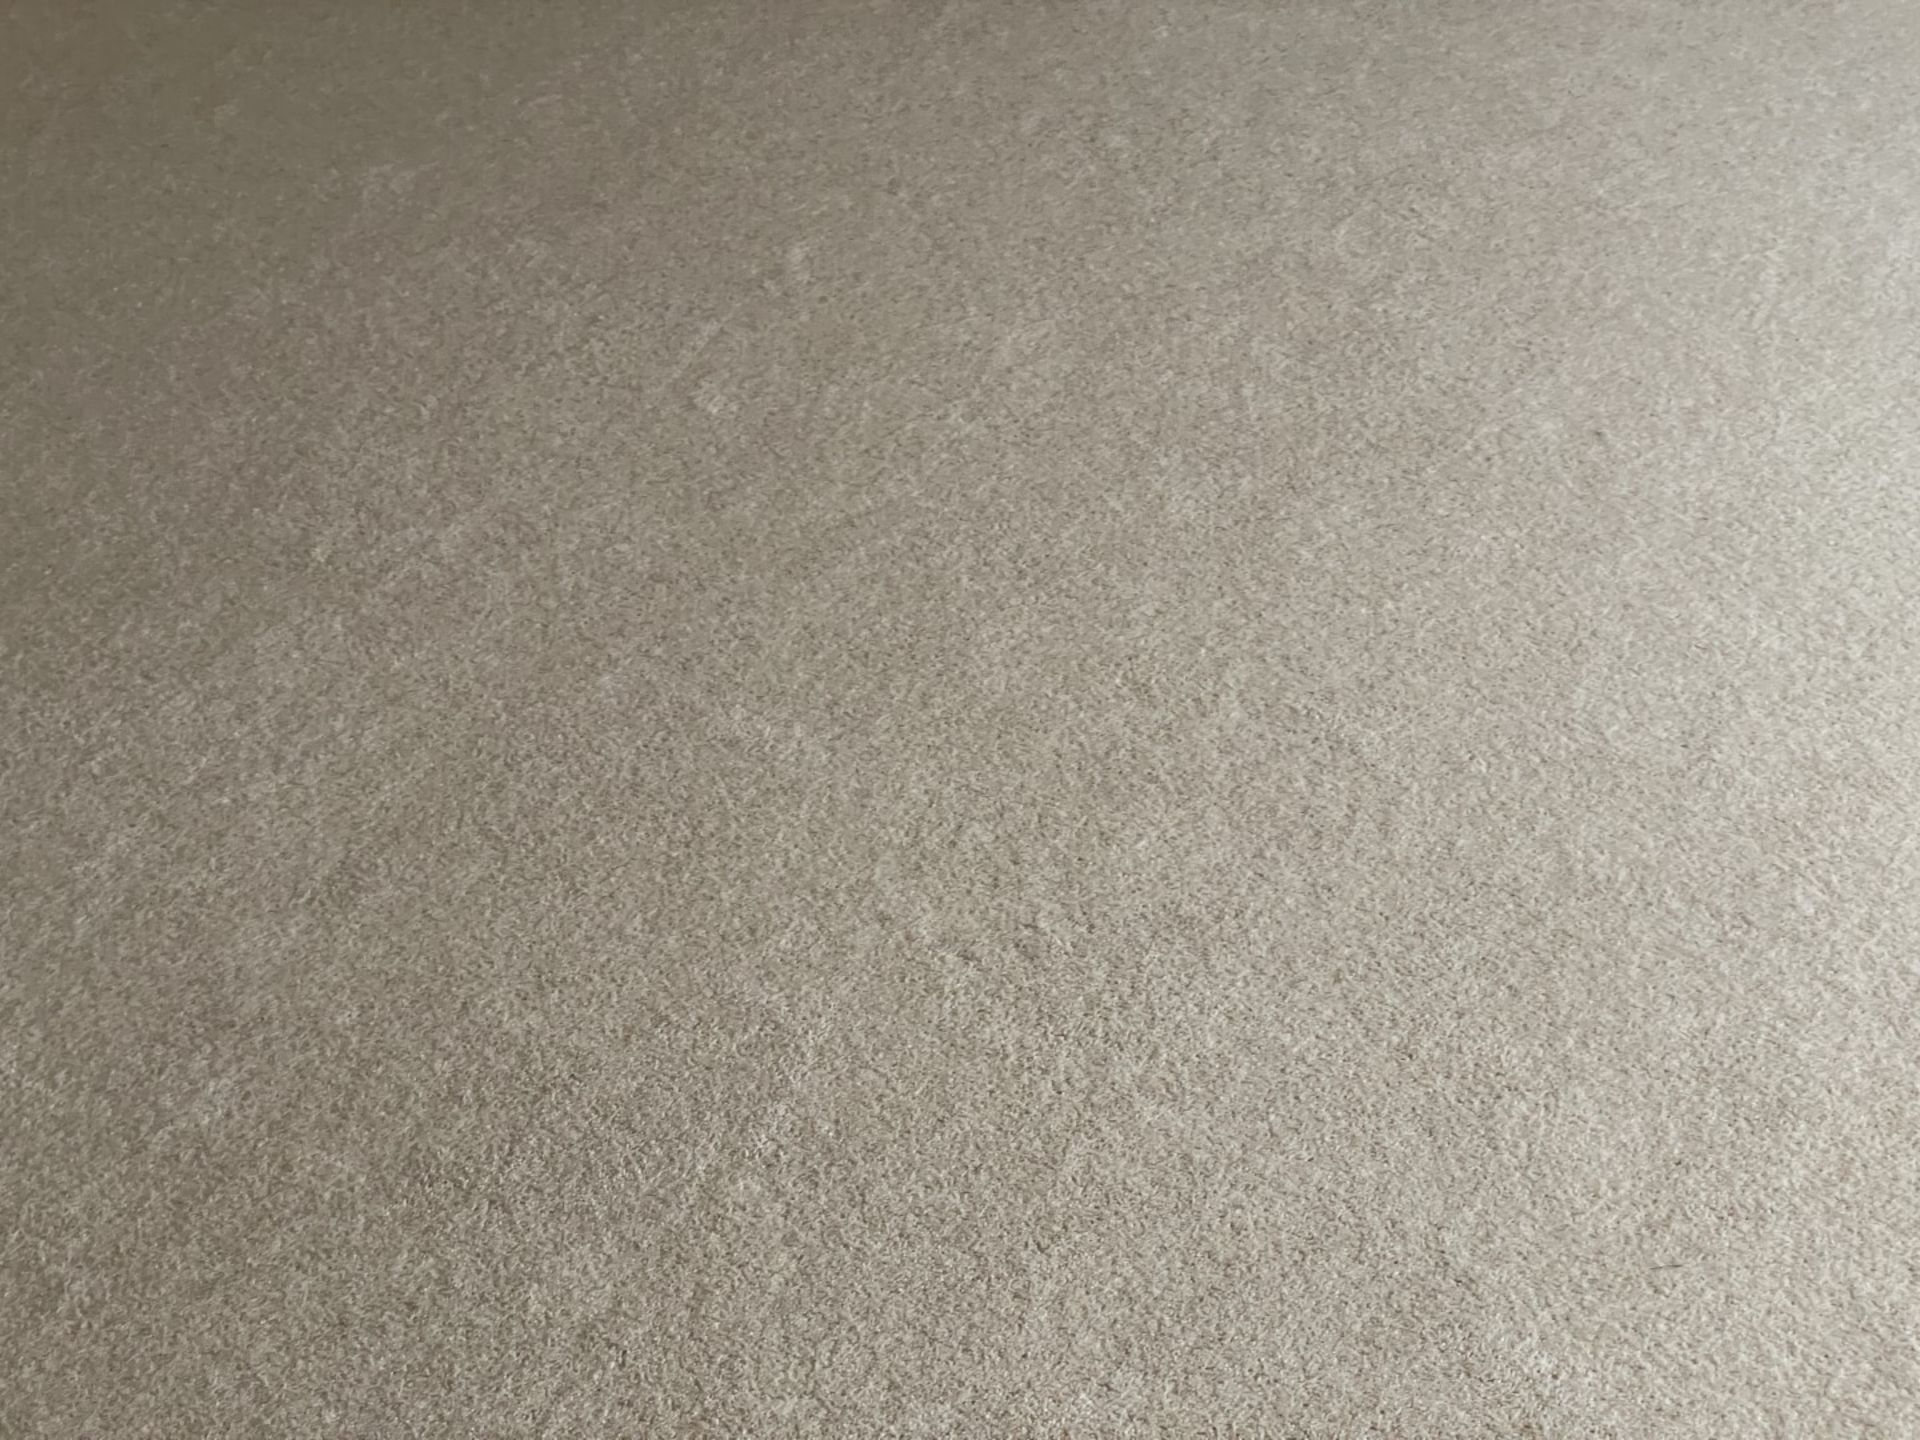 1 x Luxury Wool Back Bedroom Carpet in a Neutral Tone with Premium Underlay - Image 3 of 16